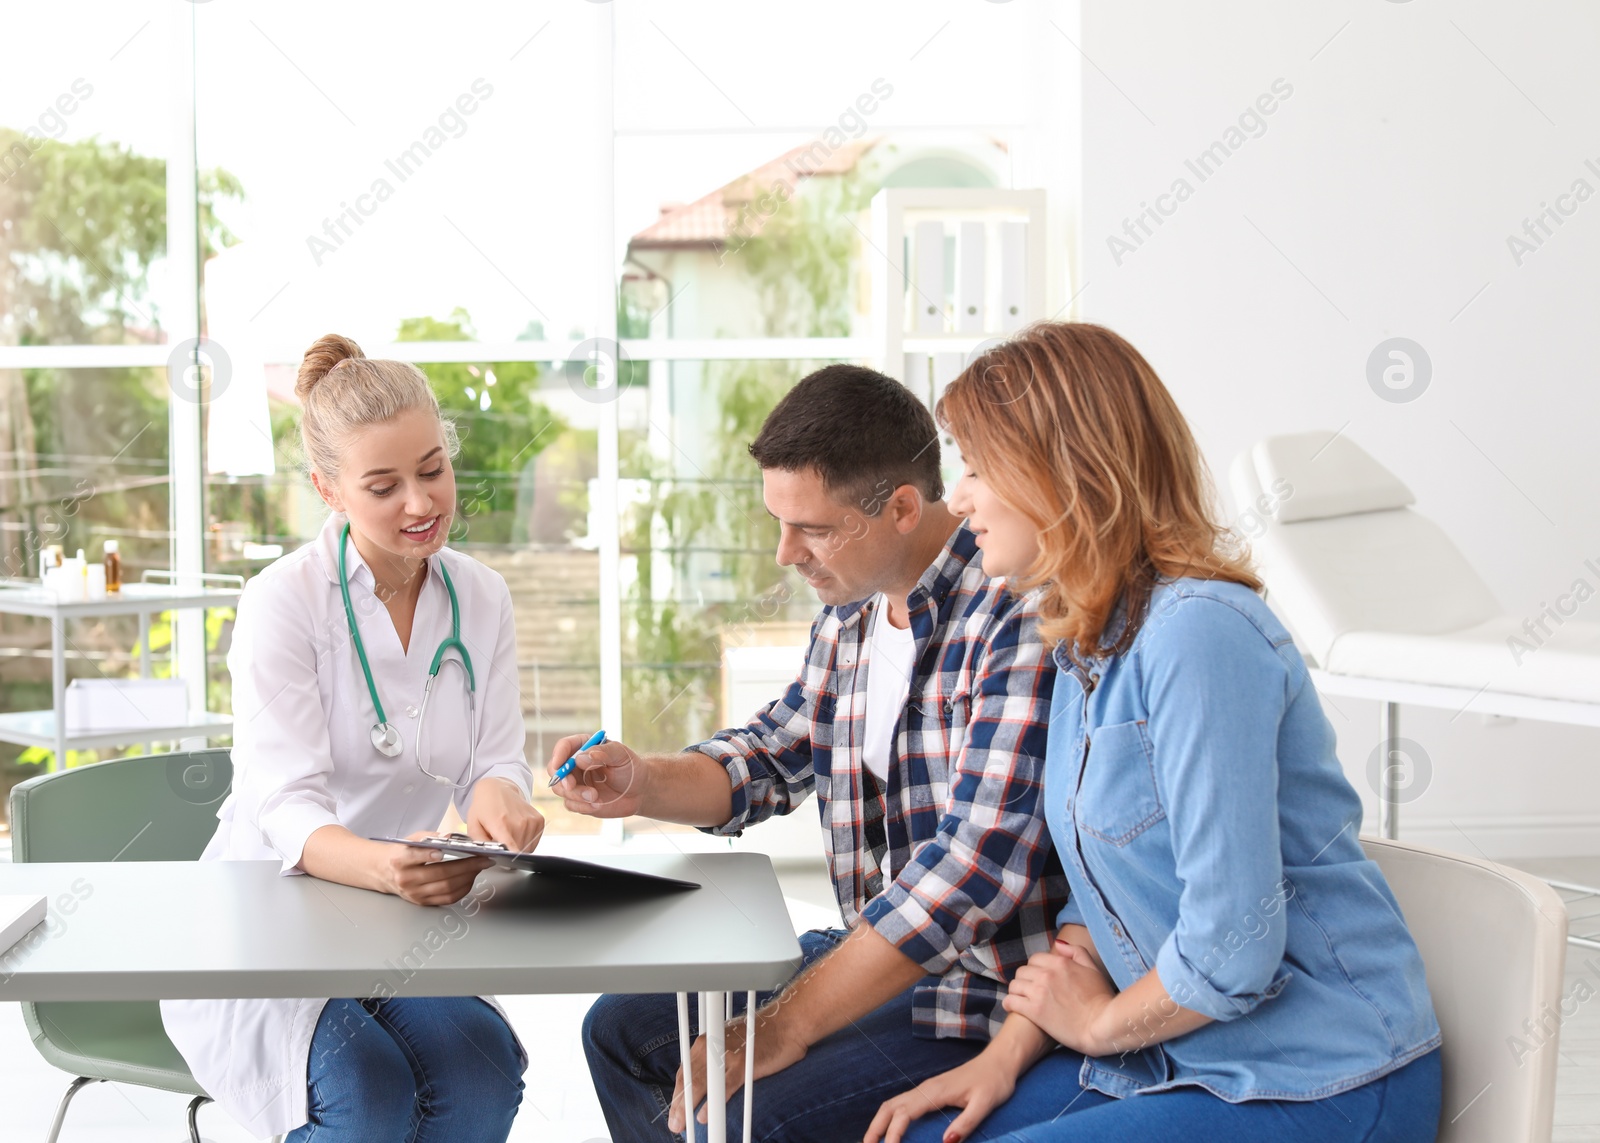 Photo of Patient consultation at doctor's office in hospital